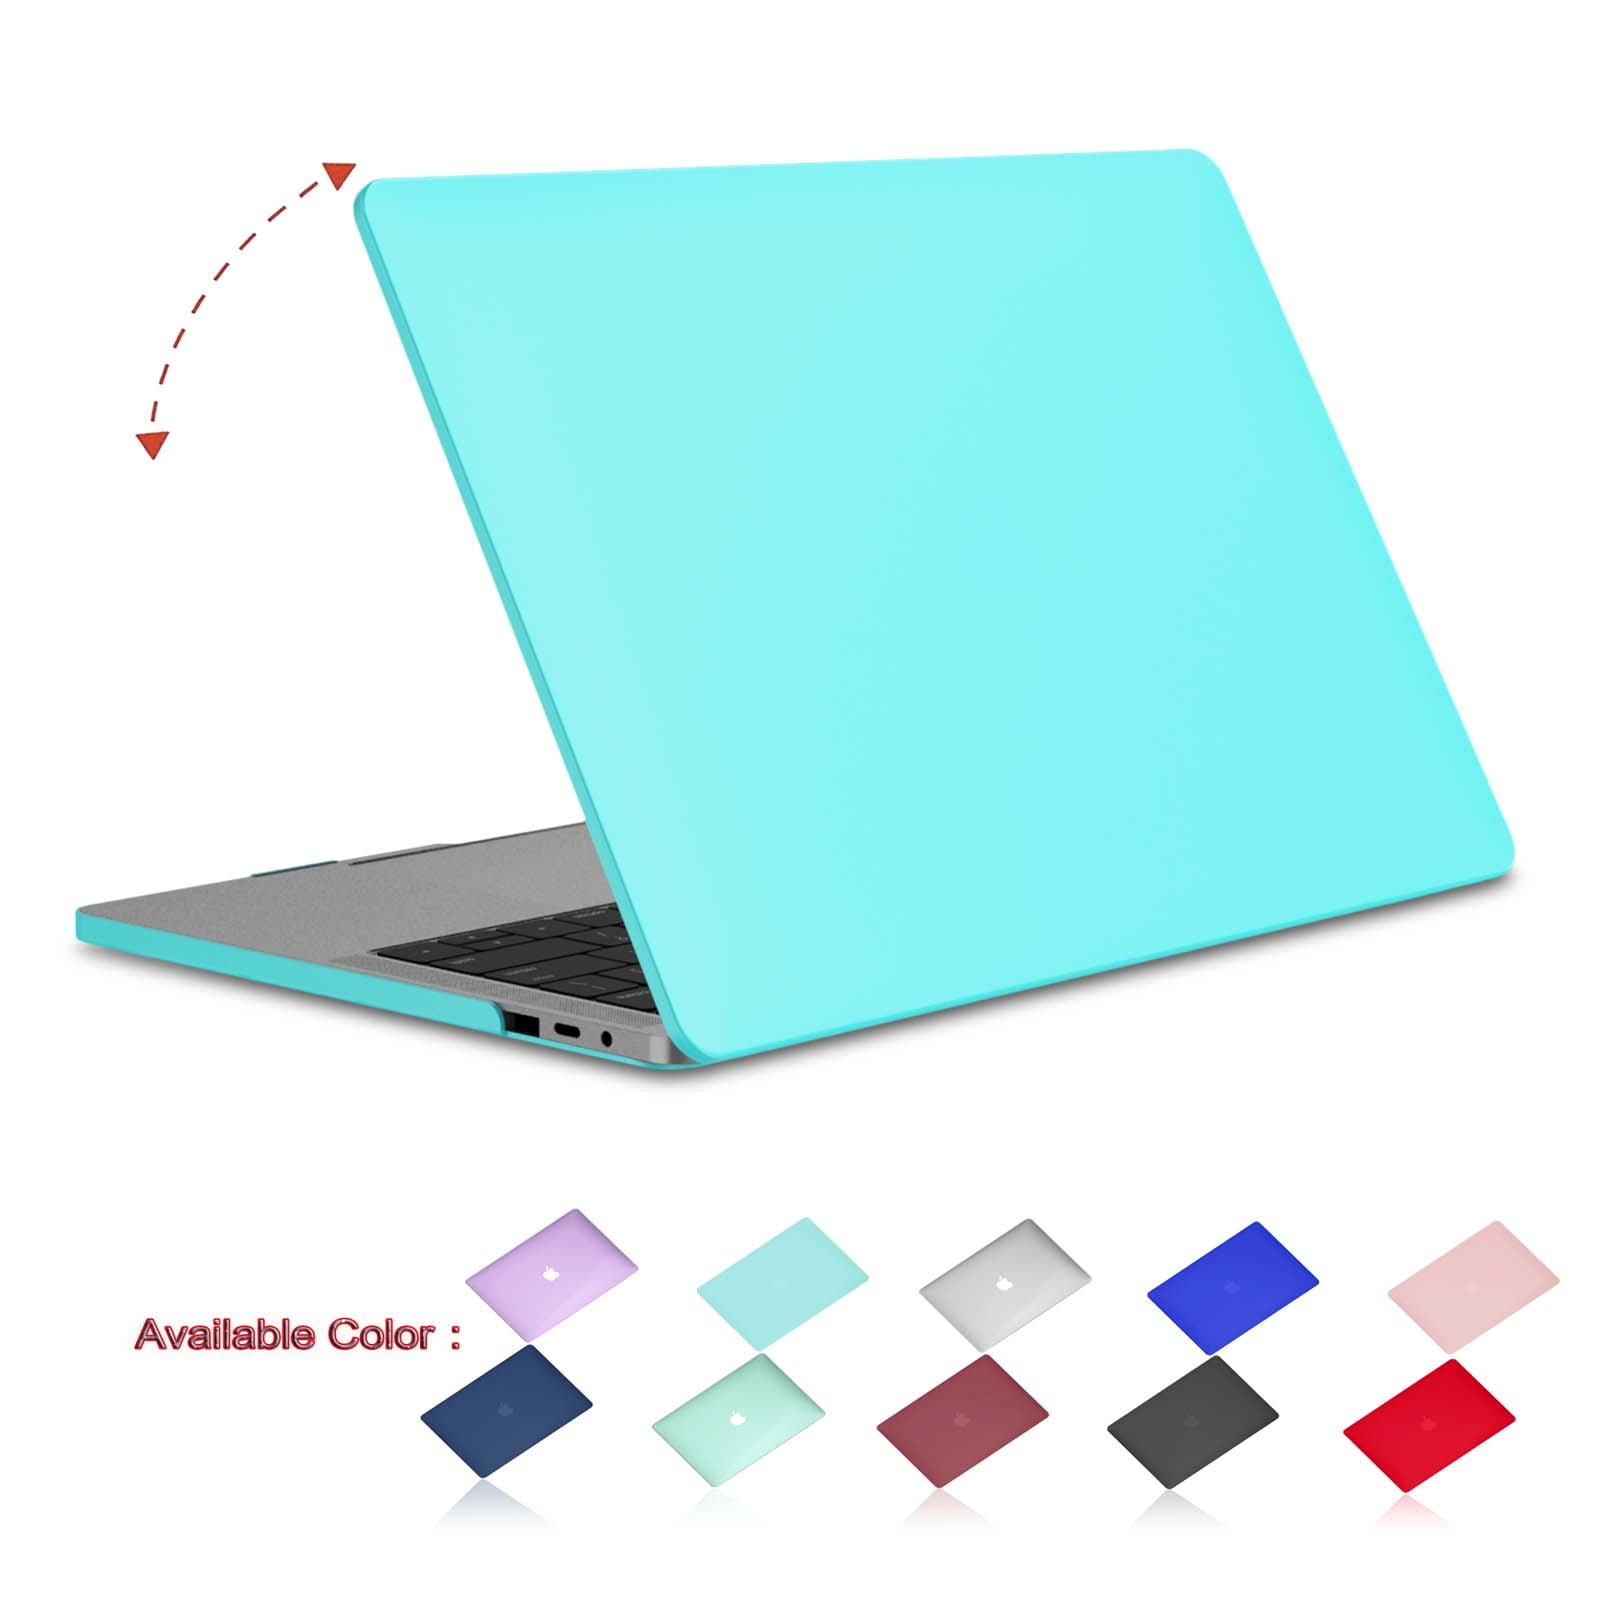 Se7enline Fashion Dream Gradient Ombre Triangular Galore Graphic Plastic Hard Case Cover for Macbook Air 13 inch Models A1369/A1466,with Clear Silicone Keyboard Skin and Screen Protector